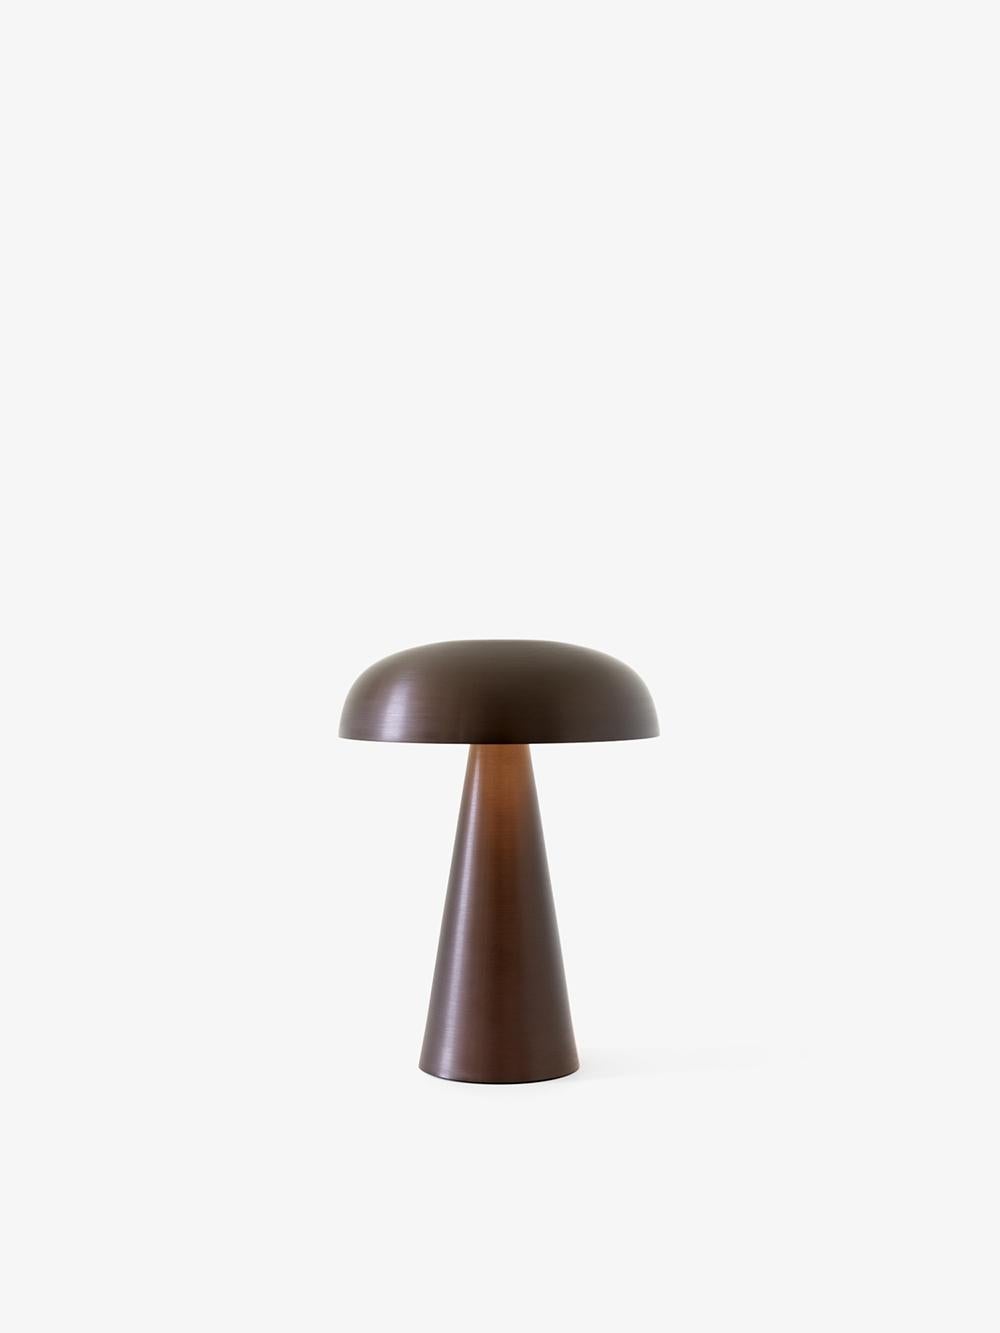 Match lighting to mood with Como SC53, a portable table lamp from Space Copenhagen. 
Crafted from anodized aluminium, Como’s sturdy base tapers up towards a softy curved, mushroom-shaped shade. 
This battery-powered lamp can operate for eleven hours